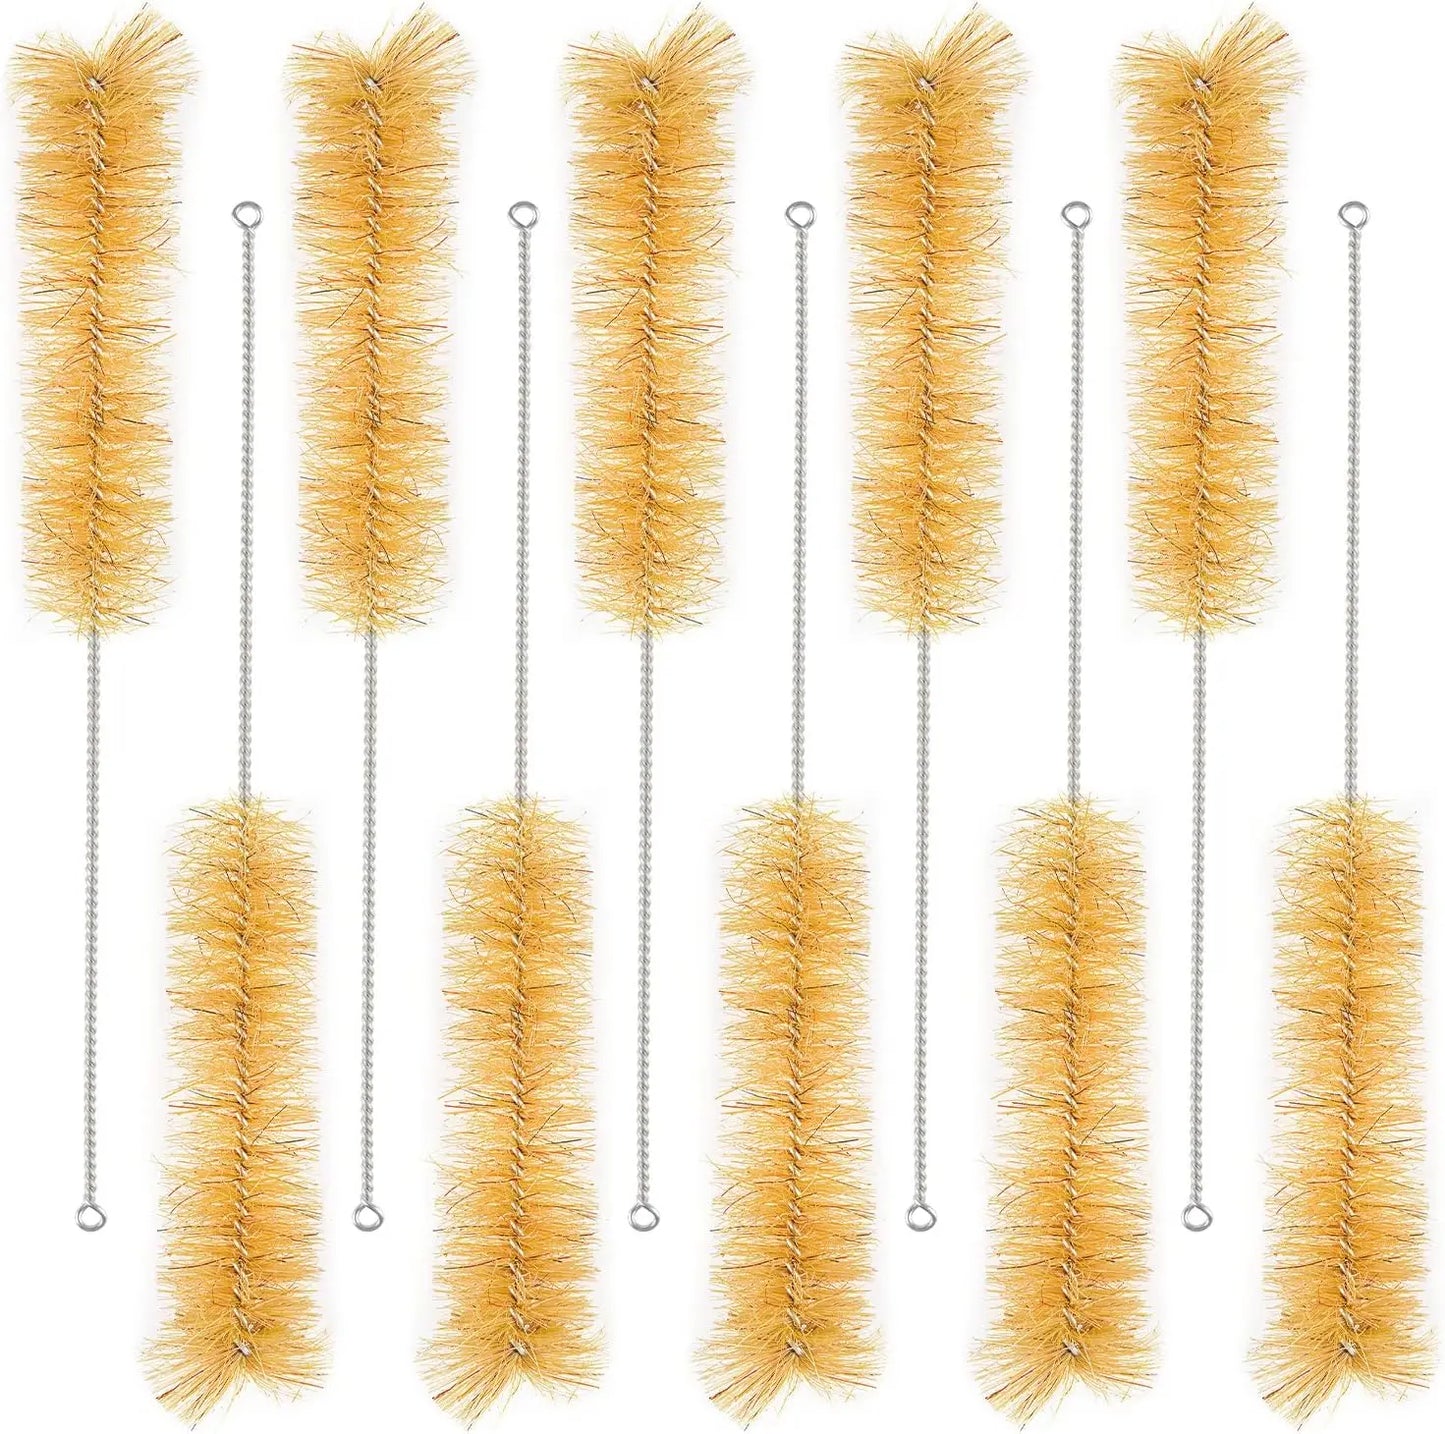 10 Pack Bristle Test Tube Brushes with Radial Tufted End, Size Assorted Brushes